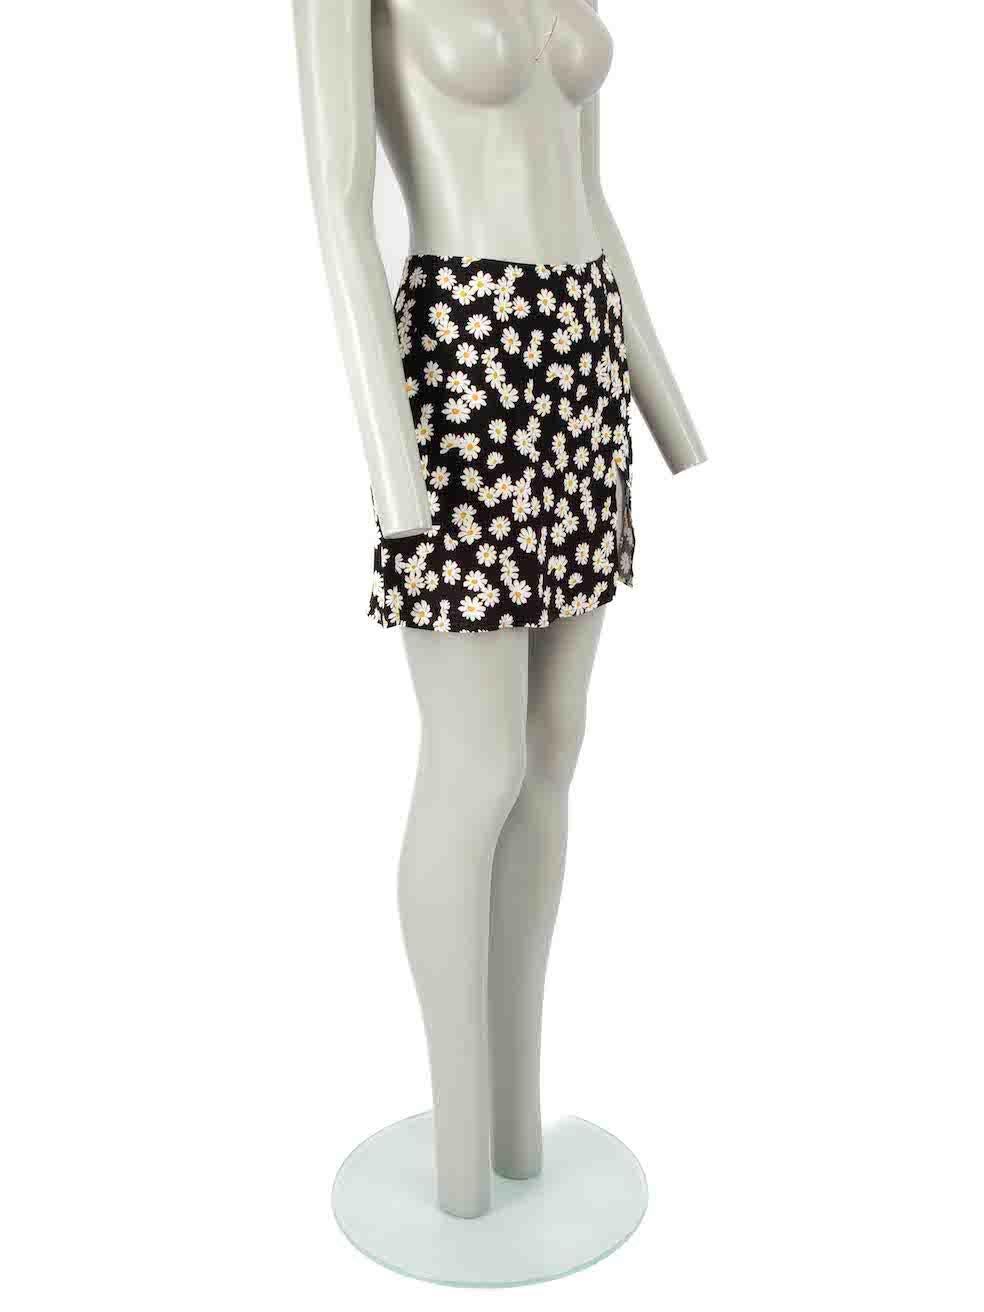 CONDITION is Very good. Minimal wear to skirt is evident. Minimal wear to the front with a pull to the weave on this used Reformation designer resale item.
 
 Details
 Black
 Viscose
 Skirt
 Mini
 Daisy print
 Front slit detail
 Back zip fastening
